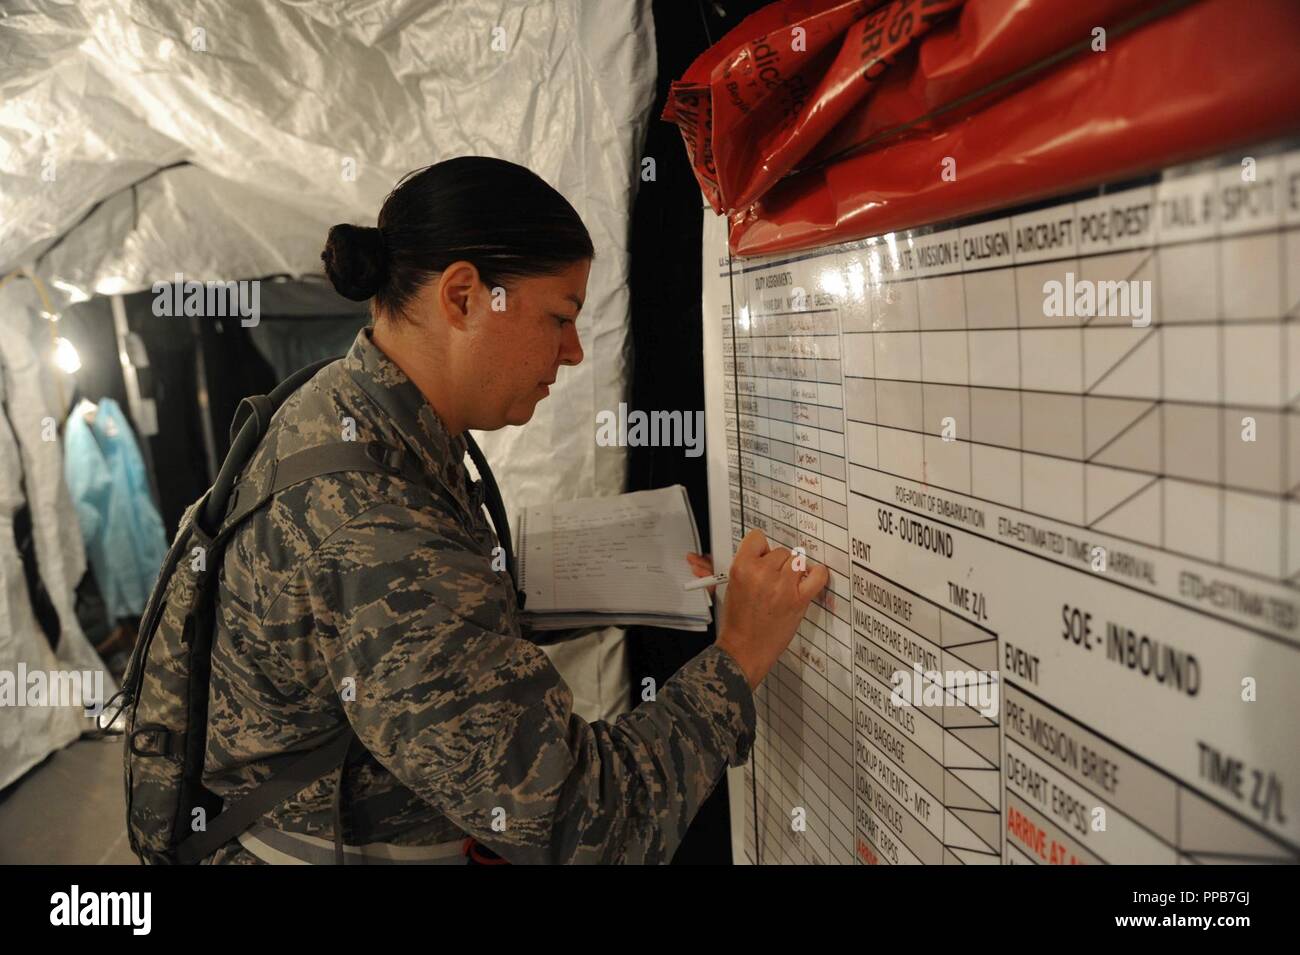 U.S. Air Force Maj. Lisa Haik, 927th Aeromedical Staging Squadron immunizations officer writes on a board in preparation for the arrival of patients during exercise Patriot Warrior on Aug. 17, 2018 at Fort McCoy, Wisc. During exercise Patriot Warrior, one aspect that the unit was evaluated for was patient movement operations. Stock Photo